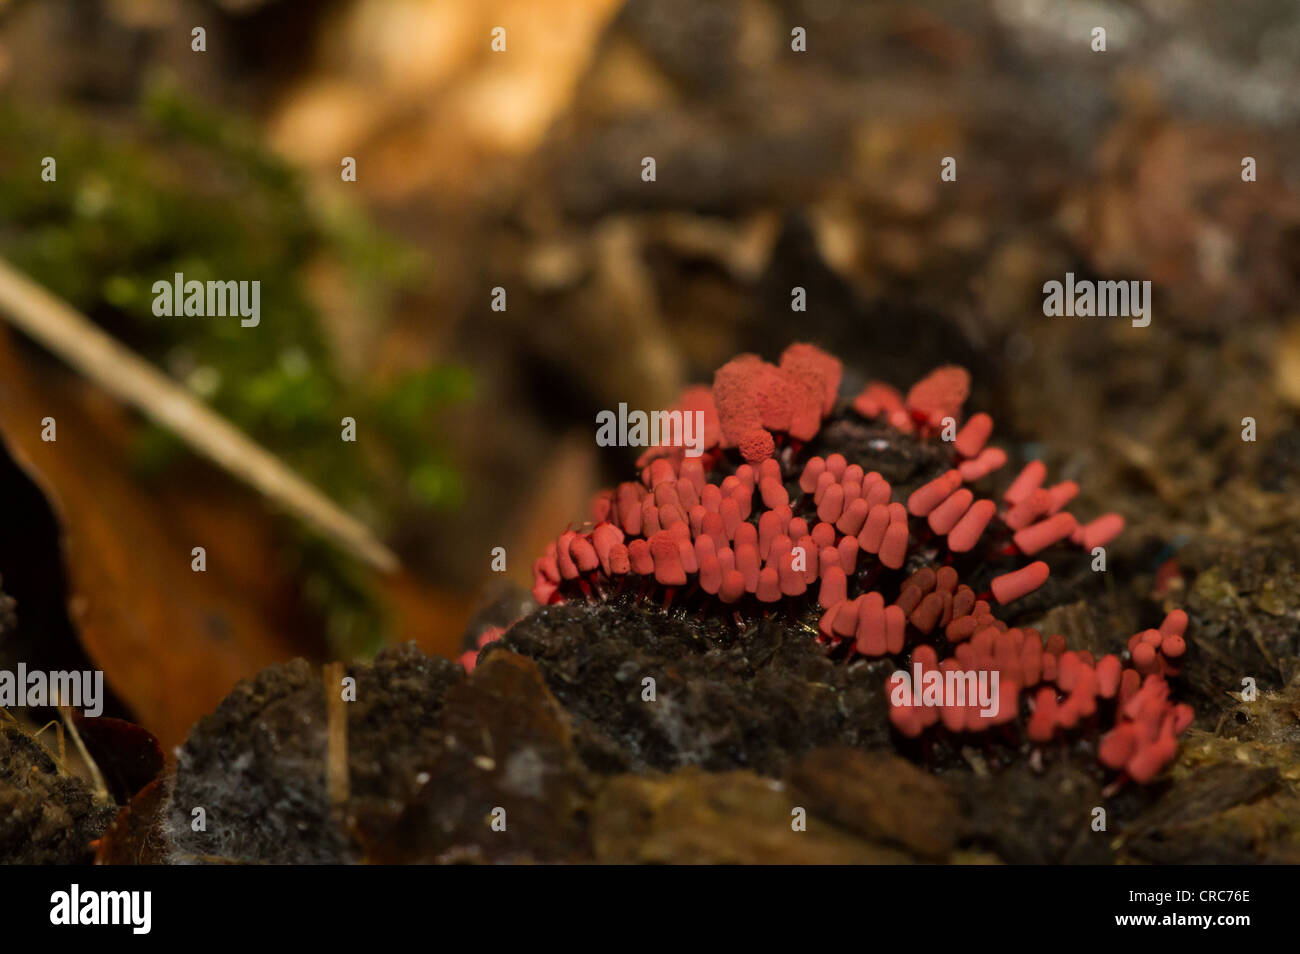 A tiny, bright red fungus, no larger than 3 millimeters, grows from a treestump in English woodland Stock Photo